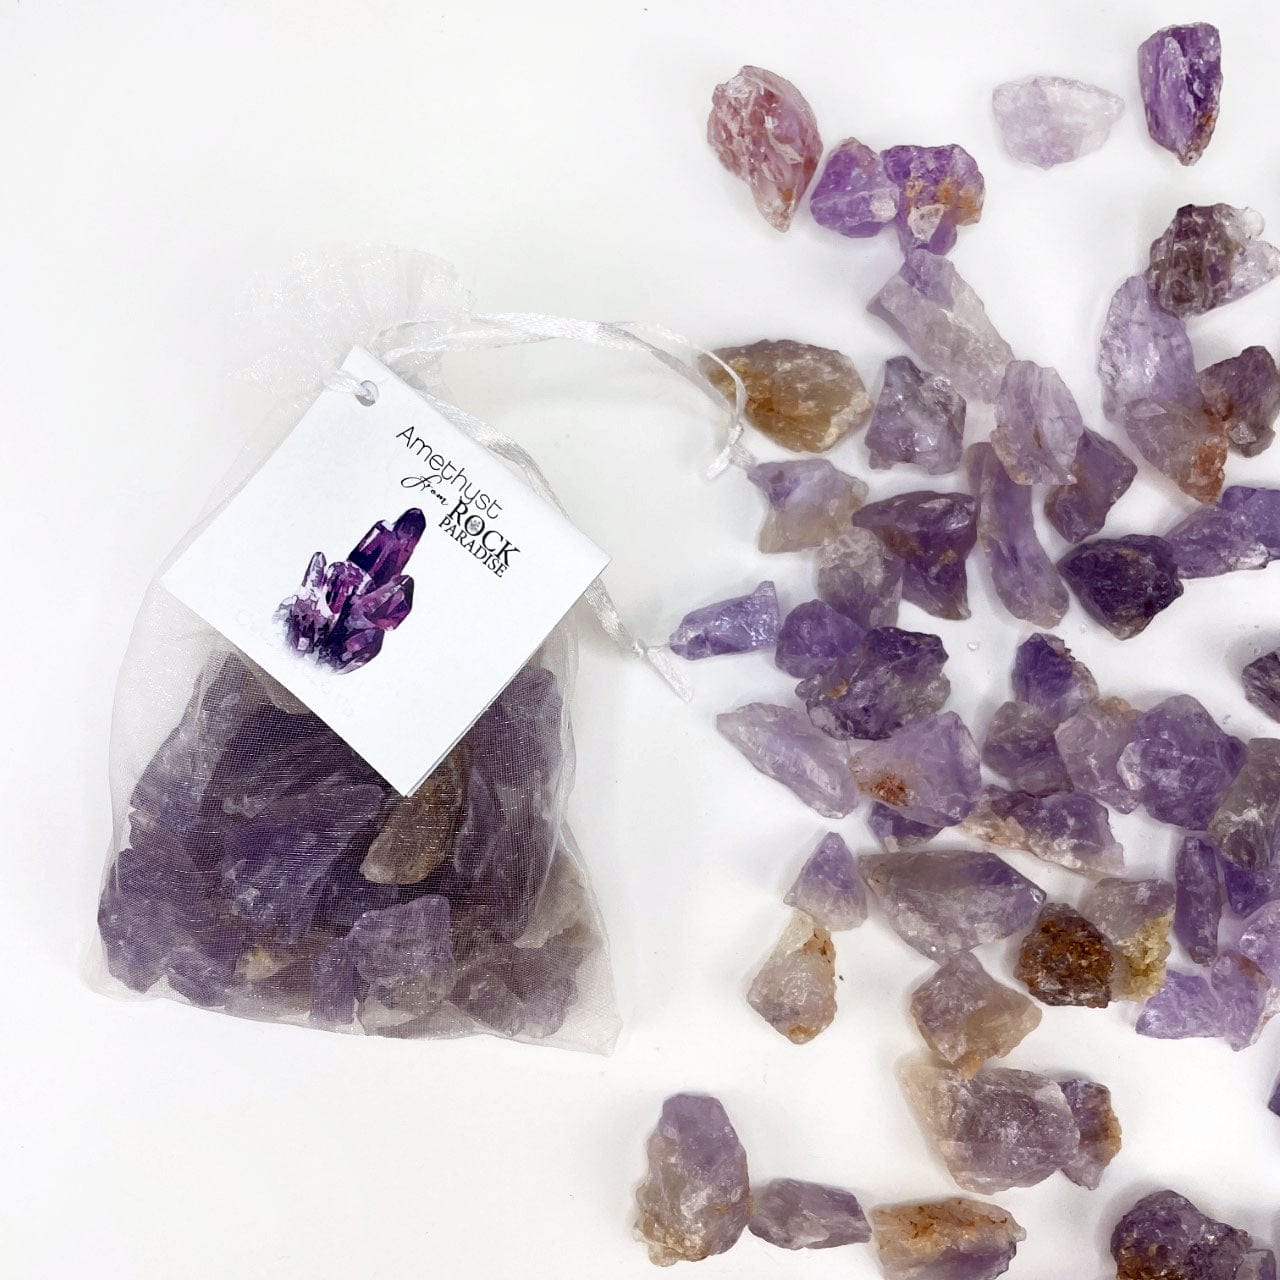 Amethyst Stones - Tied & Tagged in an Organza Bag next to some stones